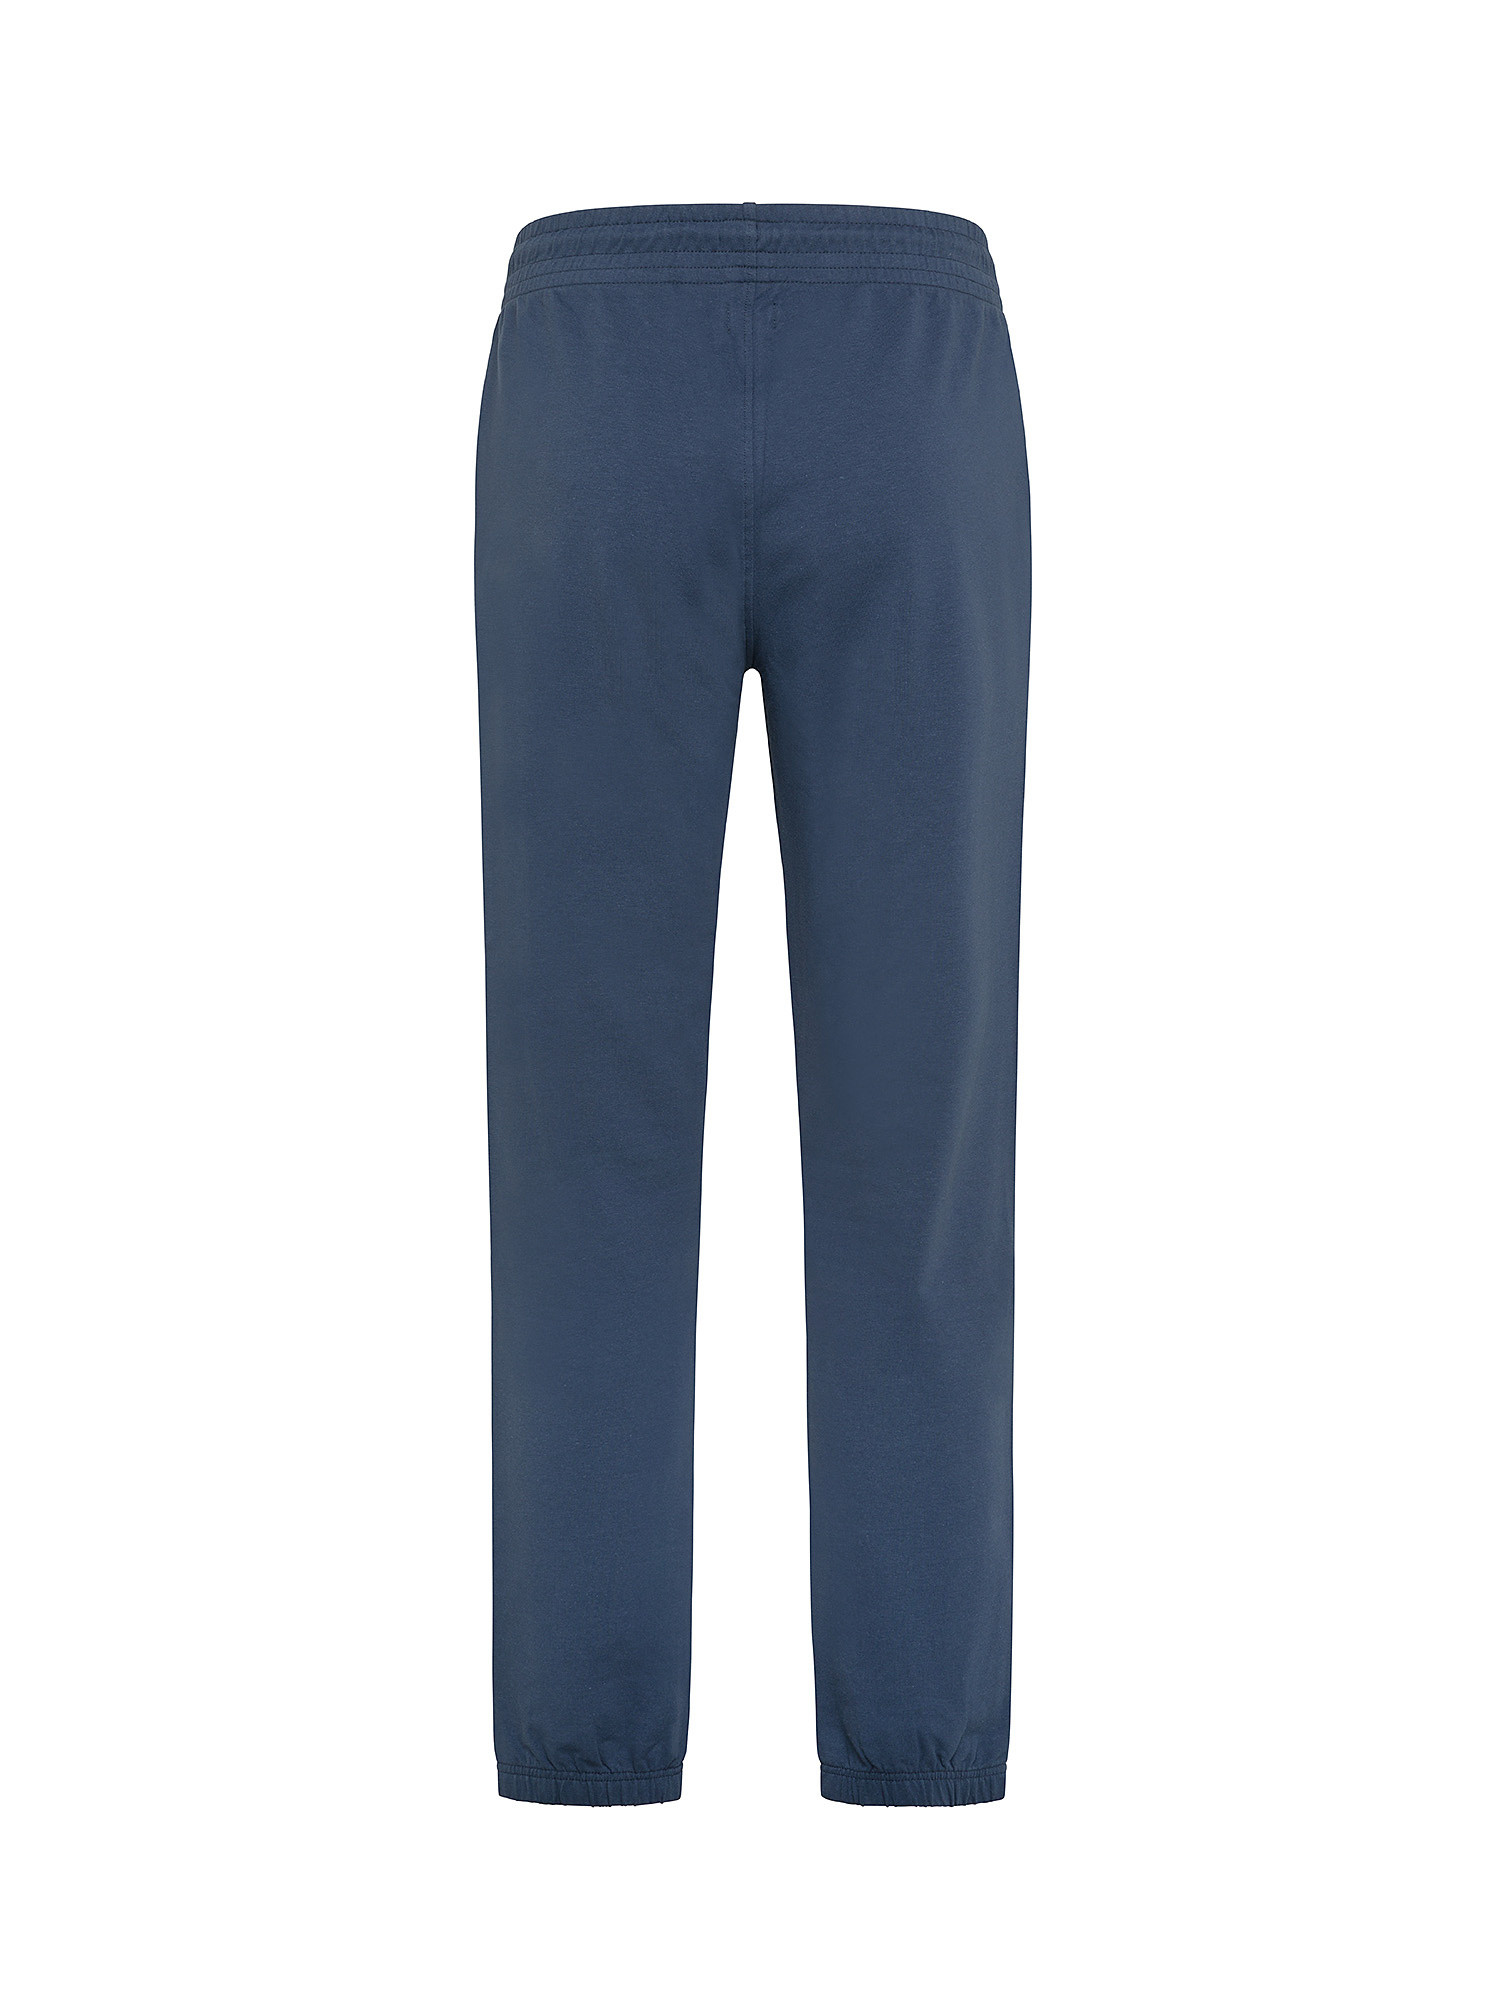 JCT - Stretch cotton trousers, Blue, large image number 1